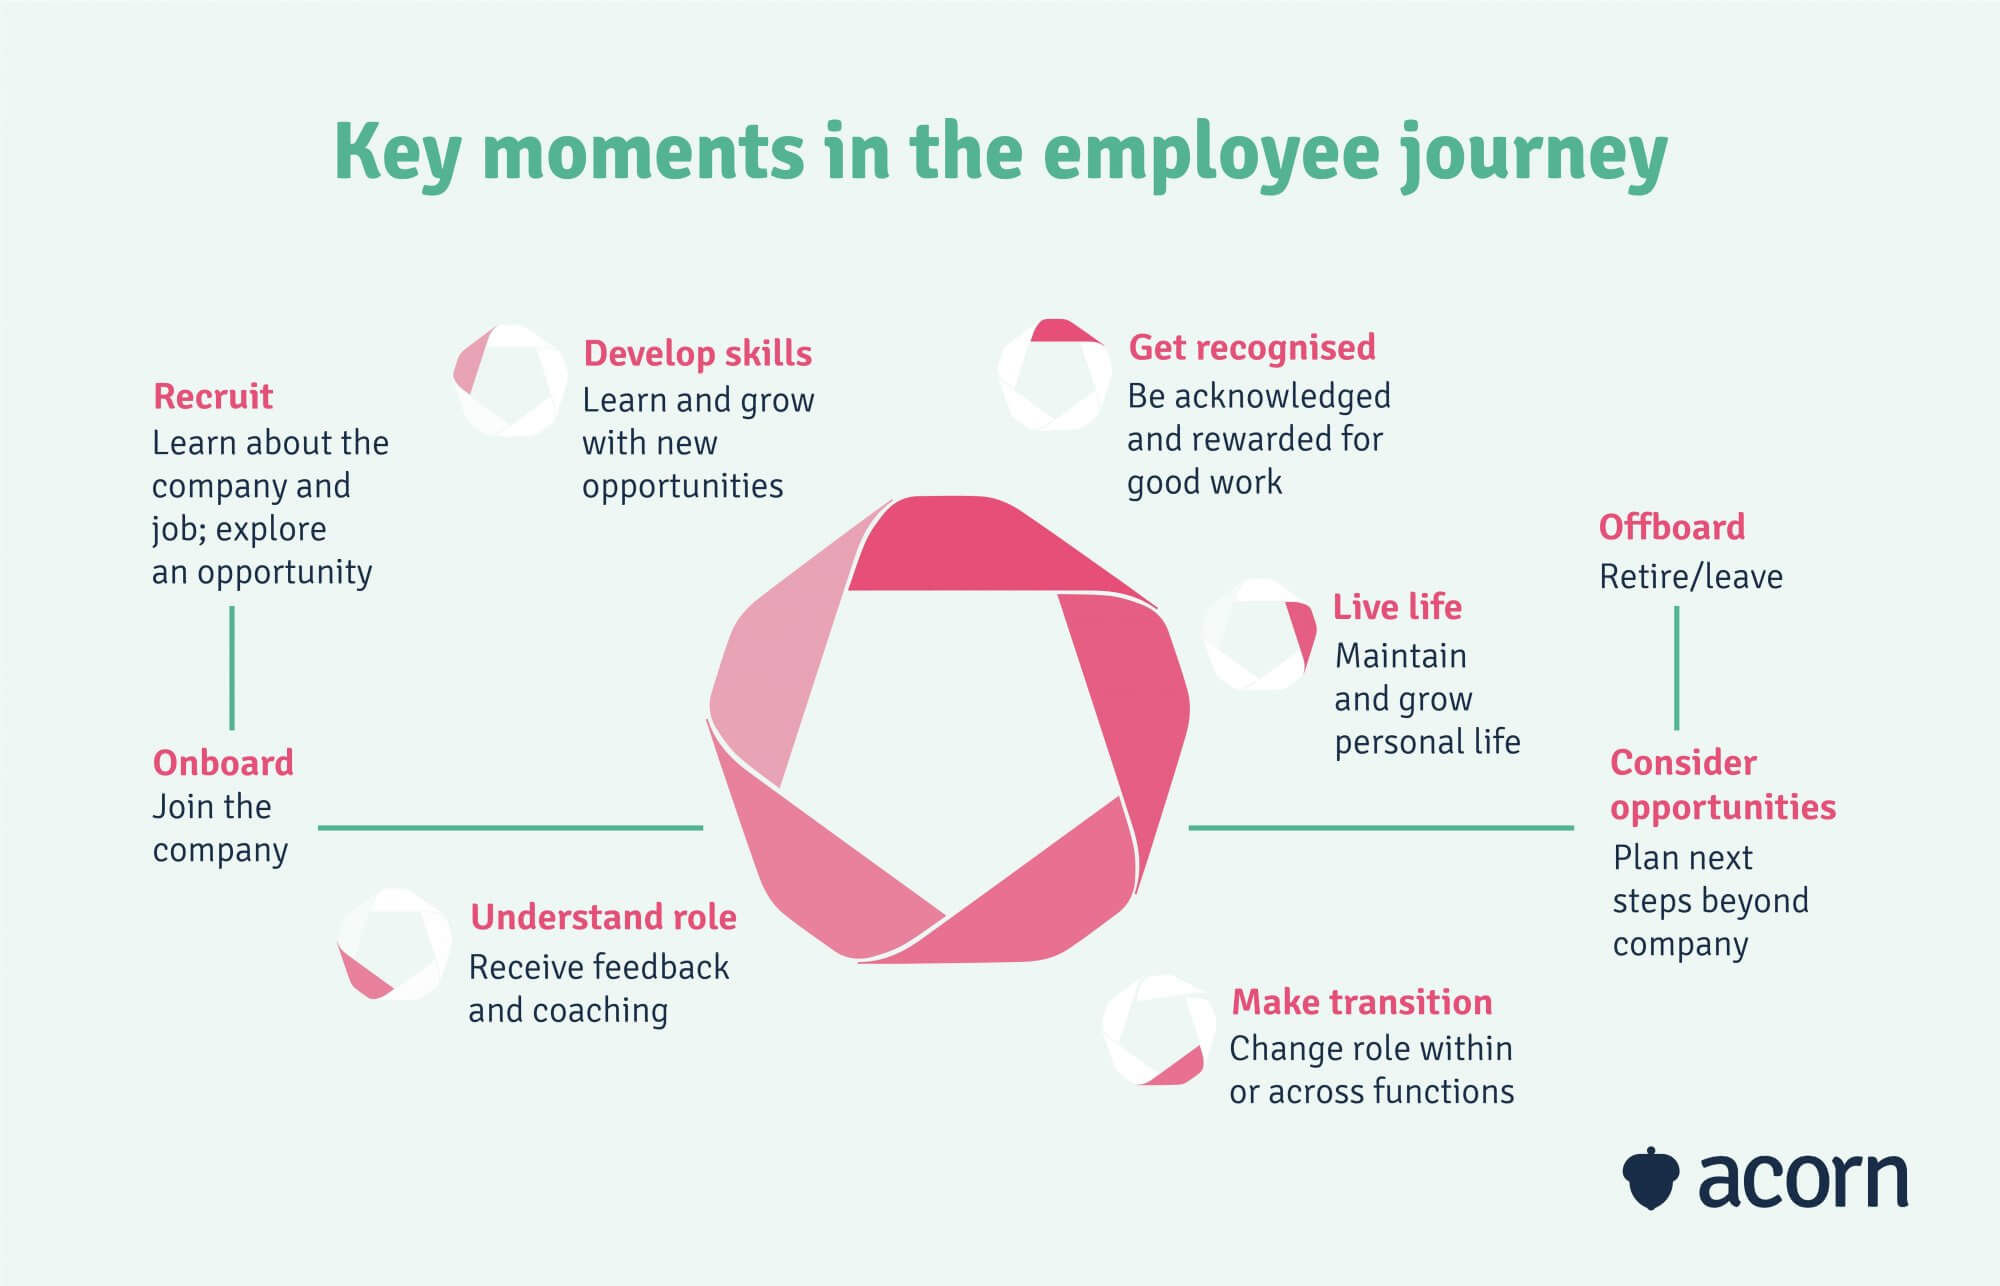 nine key moments in the employee journey in a linear career trajectory